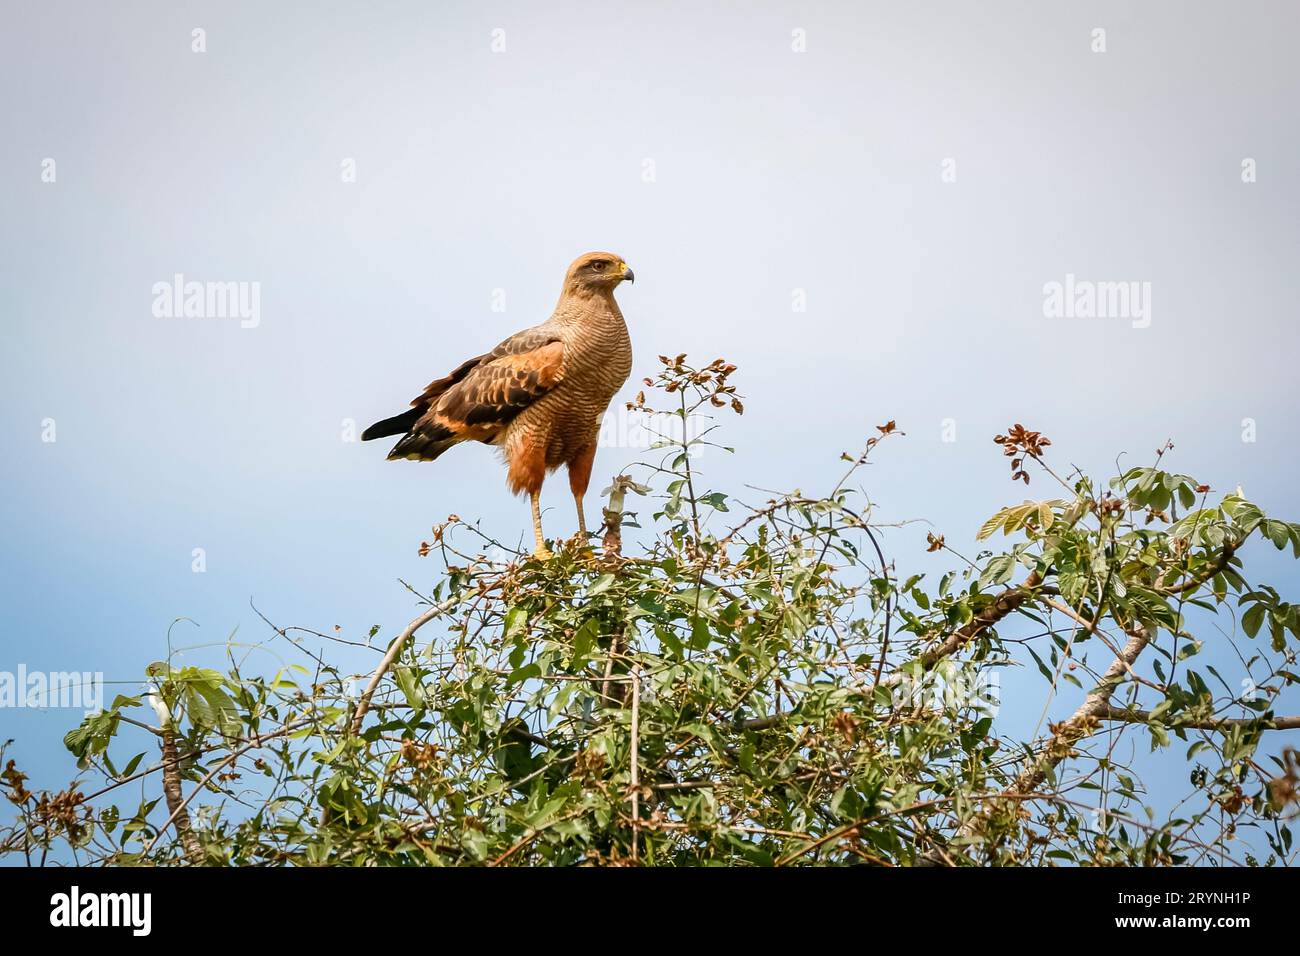 Savanna Hawk perched on top of a green tree against blue sky, Pantanal Wetlands, Mato Grosso, Brazil Stock Photo